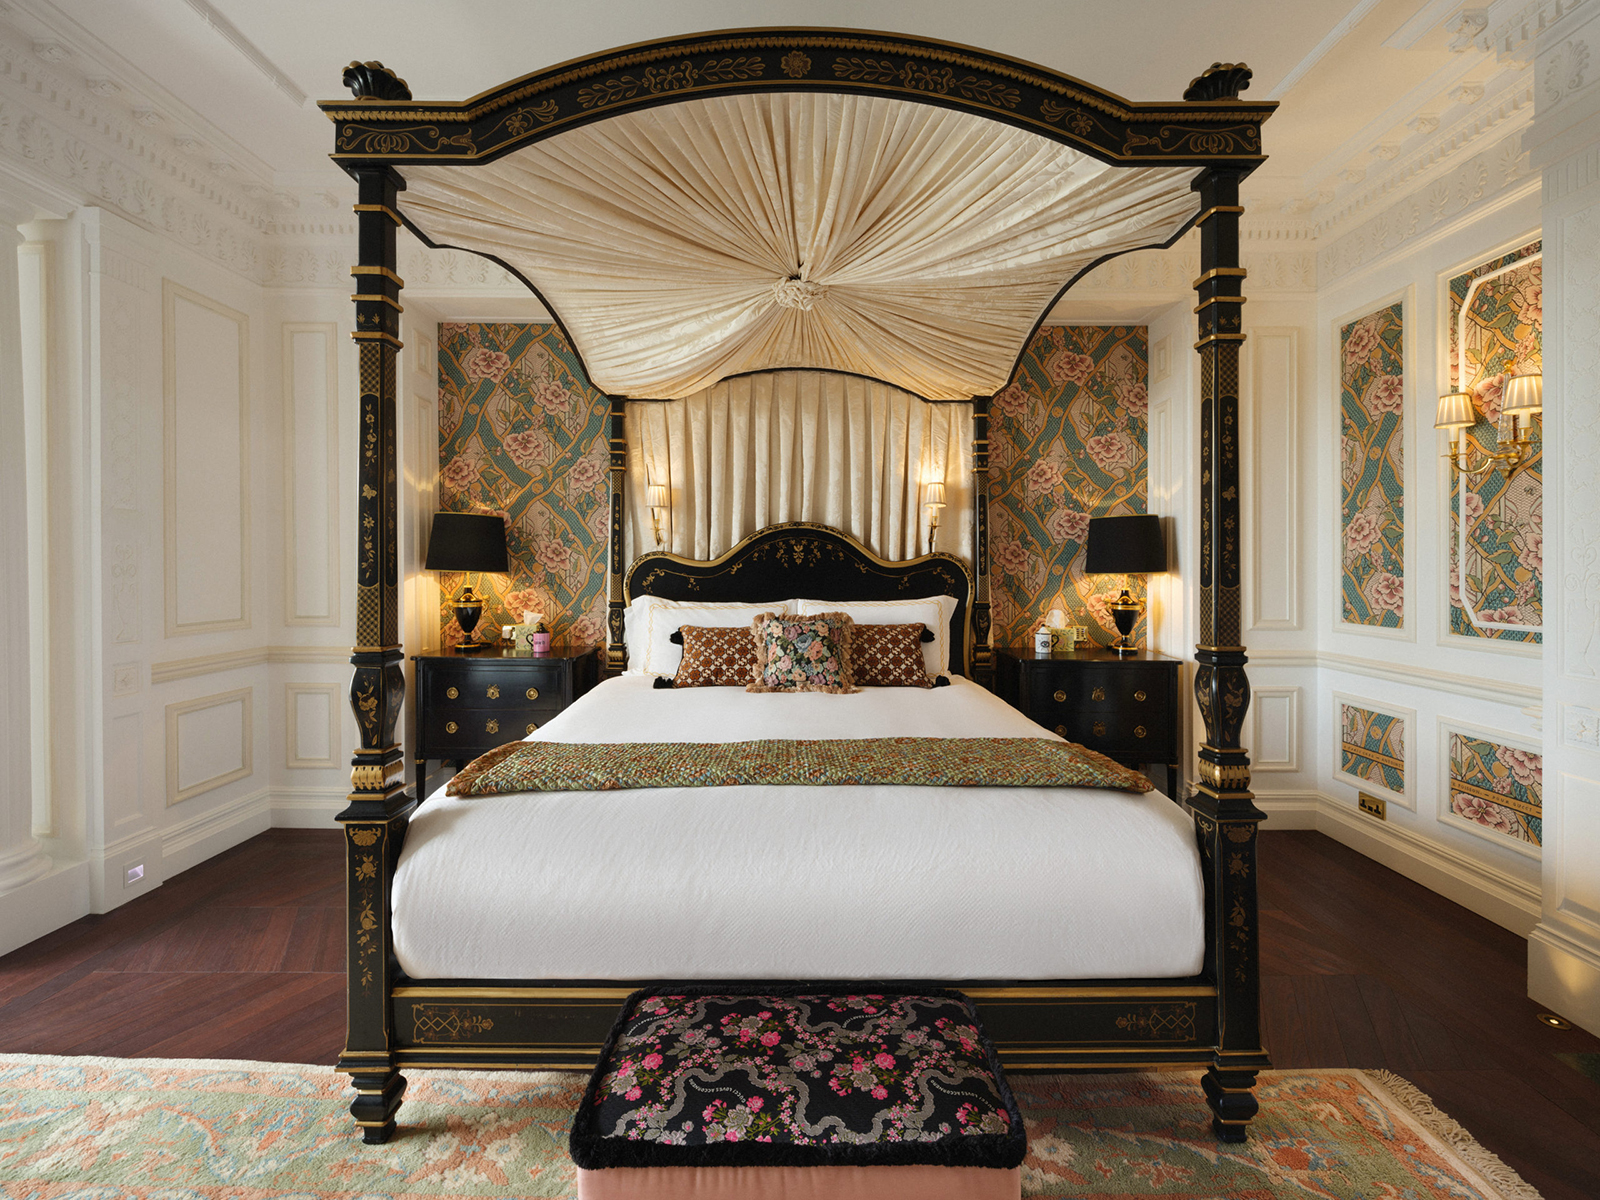 Four poster bed at The Savoy's Royal Gucci Suite